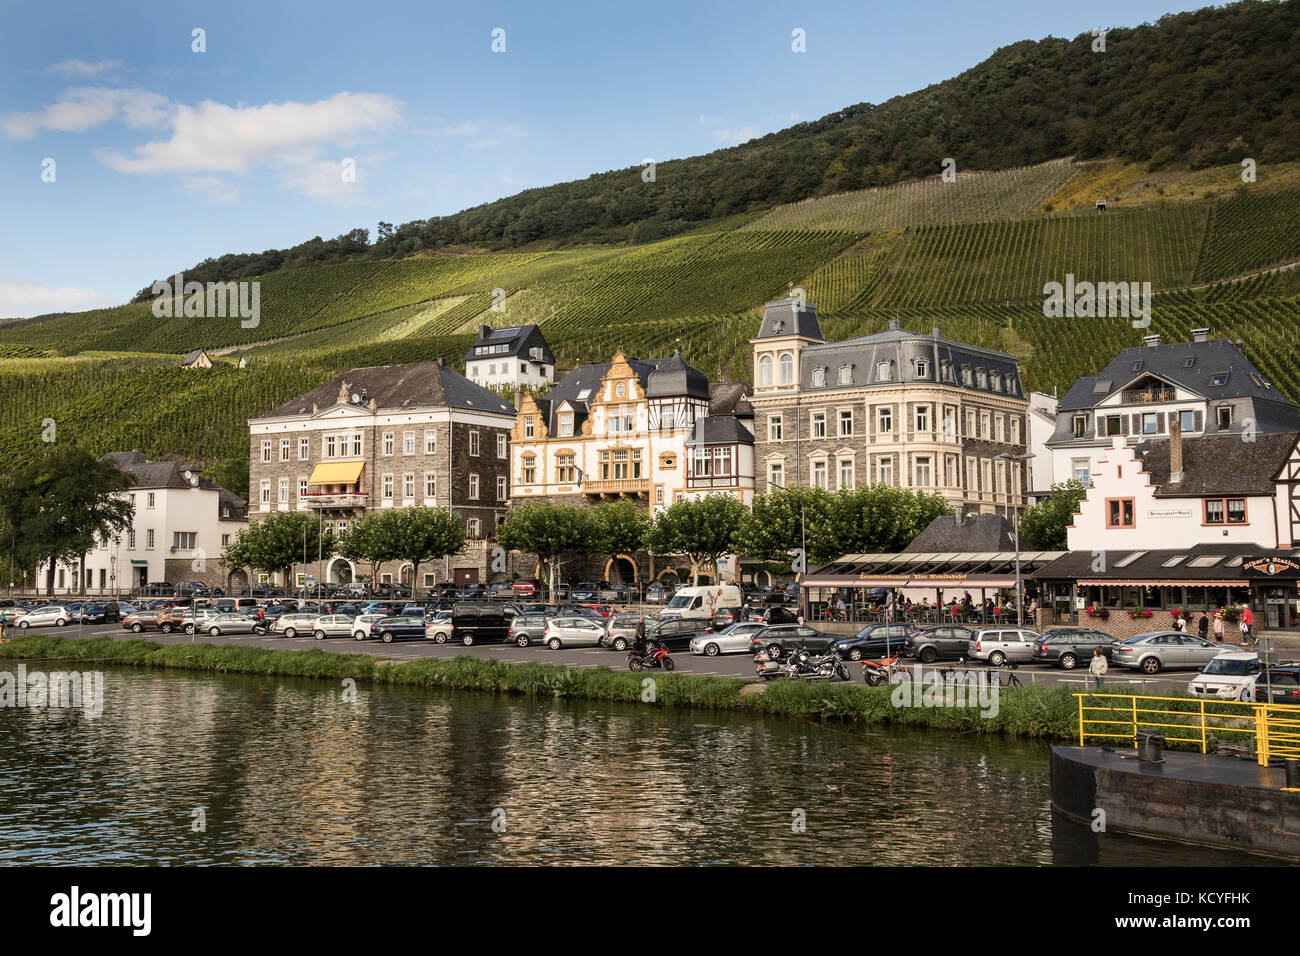 The town of Bernkastel-Kues, in the Mosel Valley, Germany. Photographed from the river boat. Showing the river cruiser Europa. Stock Photo